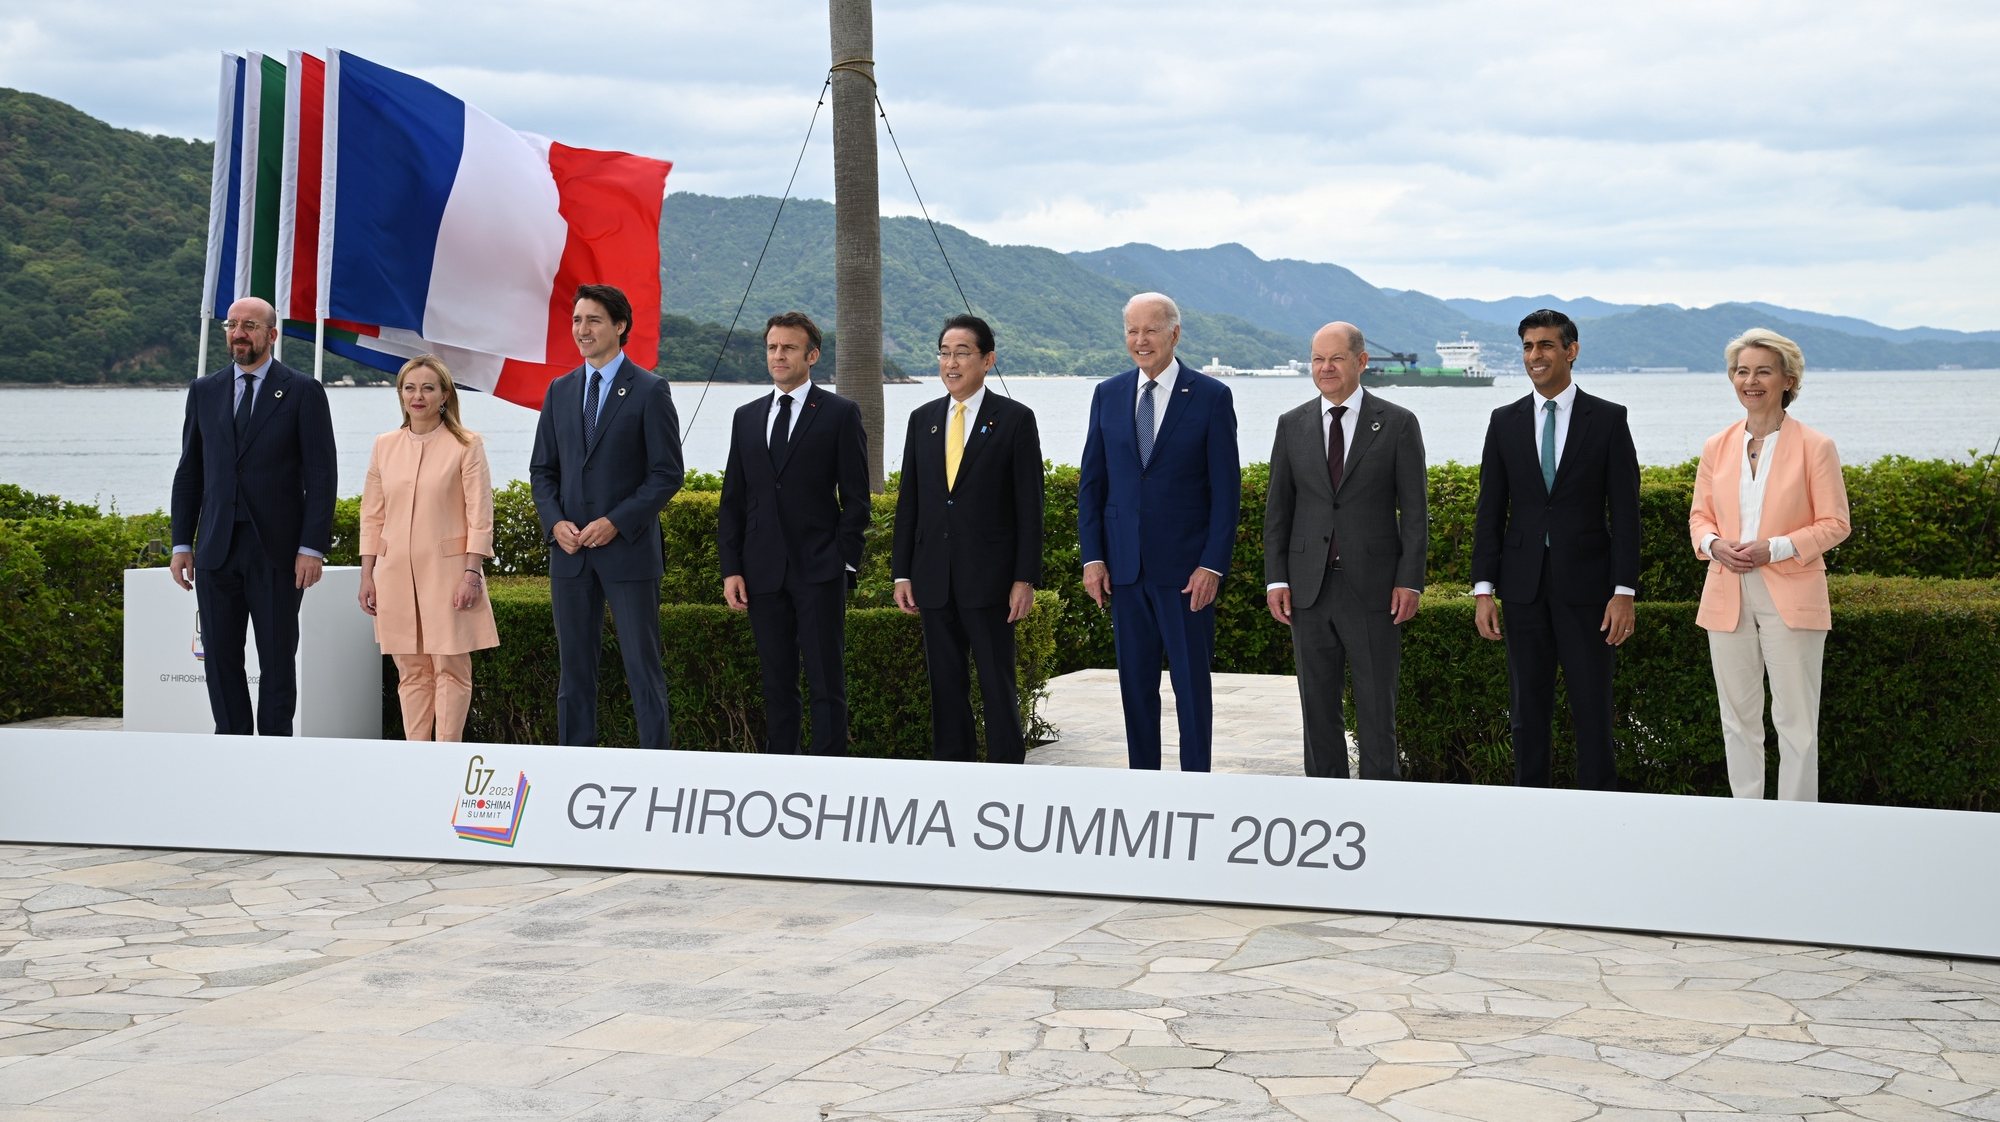 epa10639917 A handout photo made available by the G7 Hiroshima Summit Host  shows (L-R) European Council President Charles Michel, Italian Prime Minister Giorgia Meloni, Canadian Prime Minister Justin Trudeau, French President Emmanuel Macron, Japan’s Prime Minister Fumio Kishida, US President Joe Biden, German Chancellor Olaf Scholz, British Prime Minister Rishi Sunak and European Commission President Ursula von der Leyen posing for a group photo at the Grand Prince Hotel Hiroshima during the G7 Hiroshima Summit in Hiroshima, Japan, 20 May 2023. The G7 Hiroshima Summit will be held from 19 to 21 May 2023  EPA/G7 Hiroshima Summit Host / HANDOUT  HANDOUT EDITORIAL USE ONLY/NO SALES